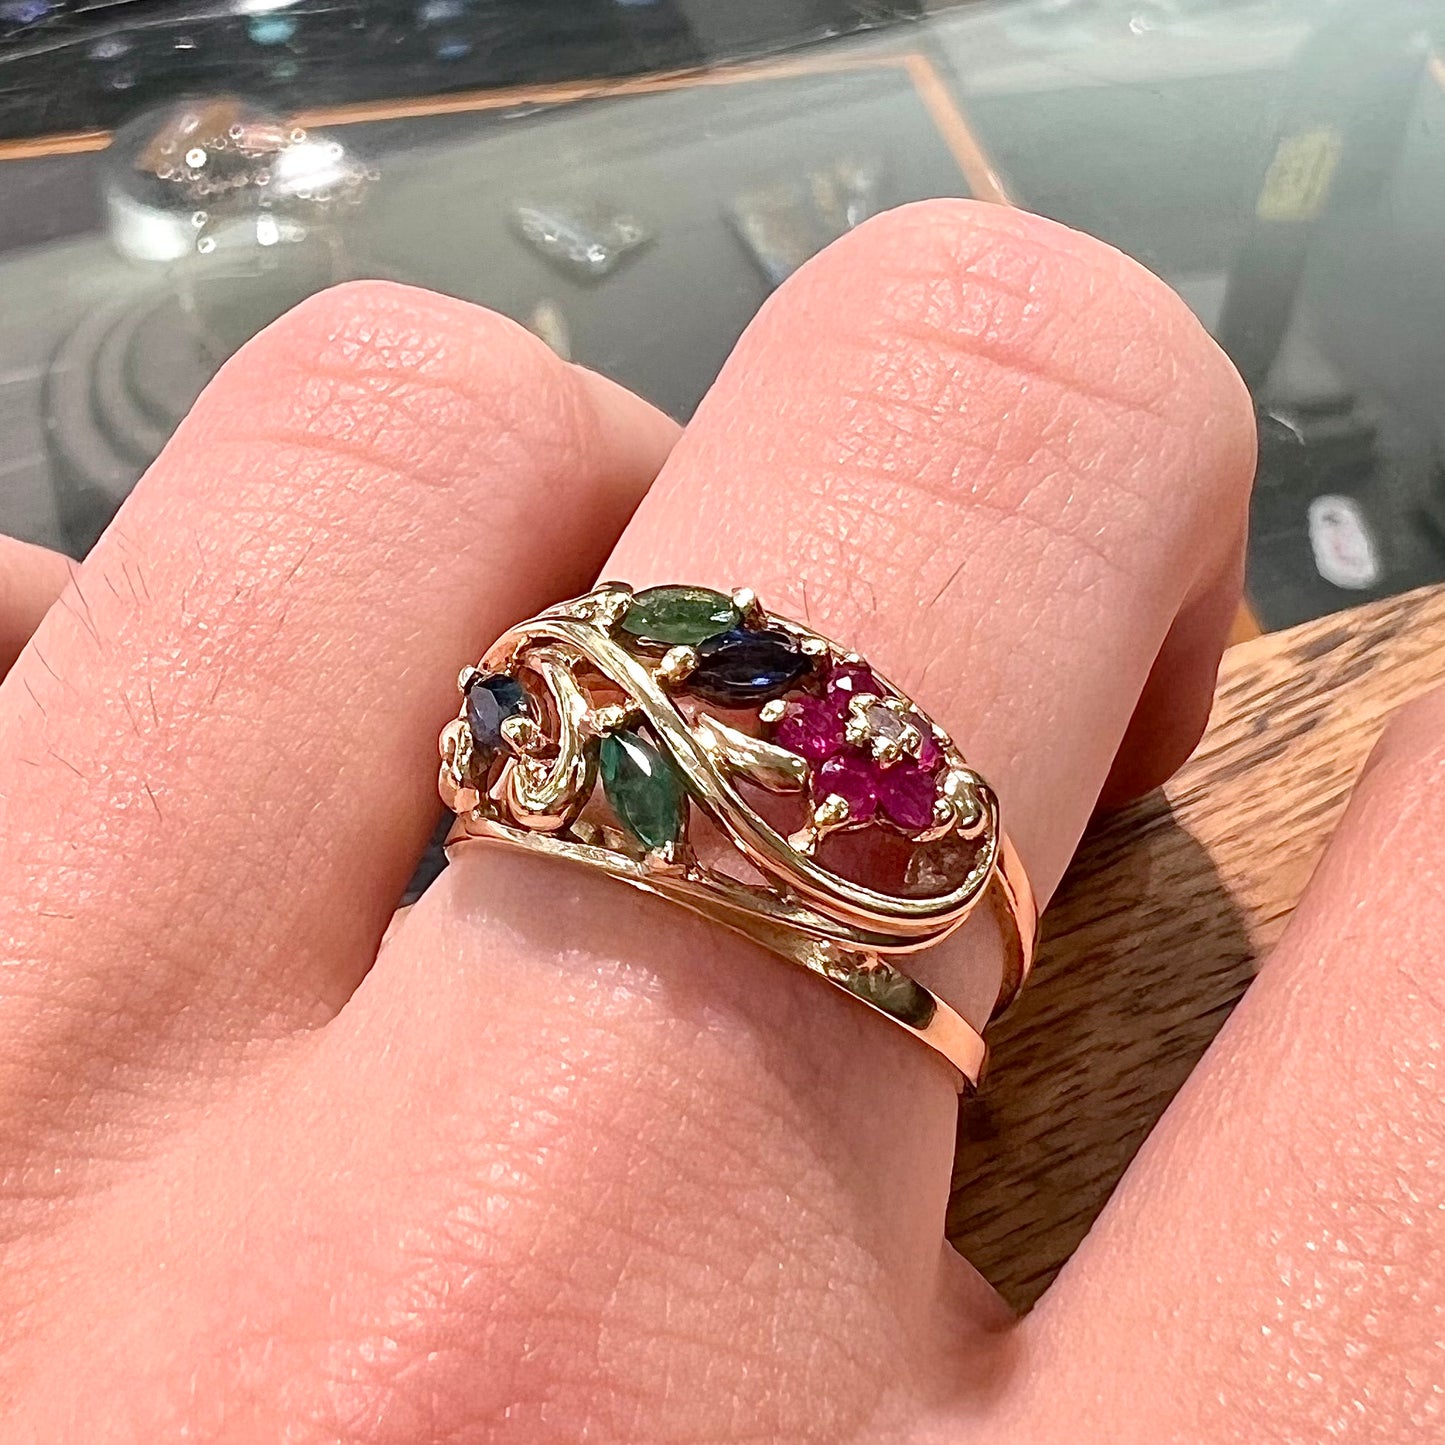 A yellow gold ladies' ring featuring the motif of a flower with leaves set with emeralds, rubies, sapphires, and a  diamond.